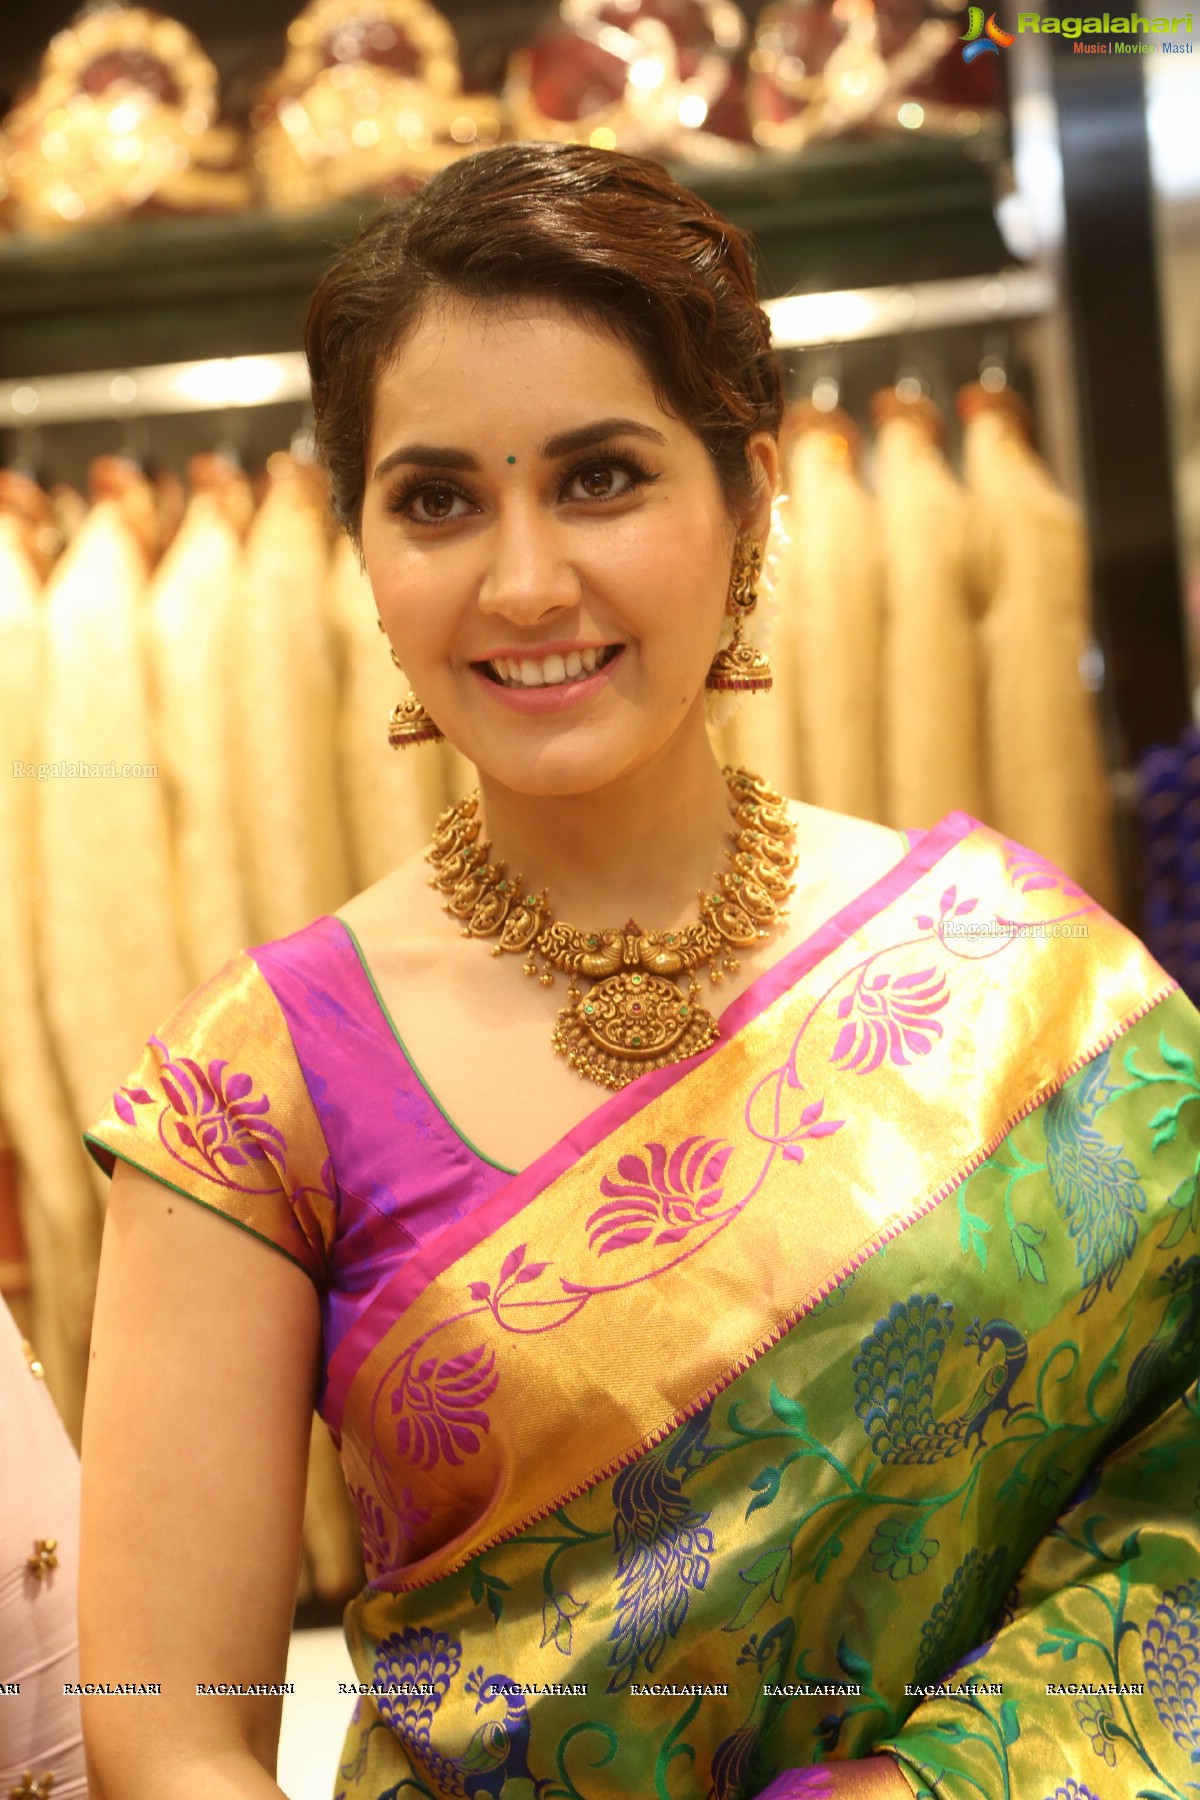 Gorgeous Raashi Khanna in Saree at South Indian Shopping Mall